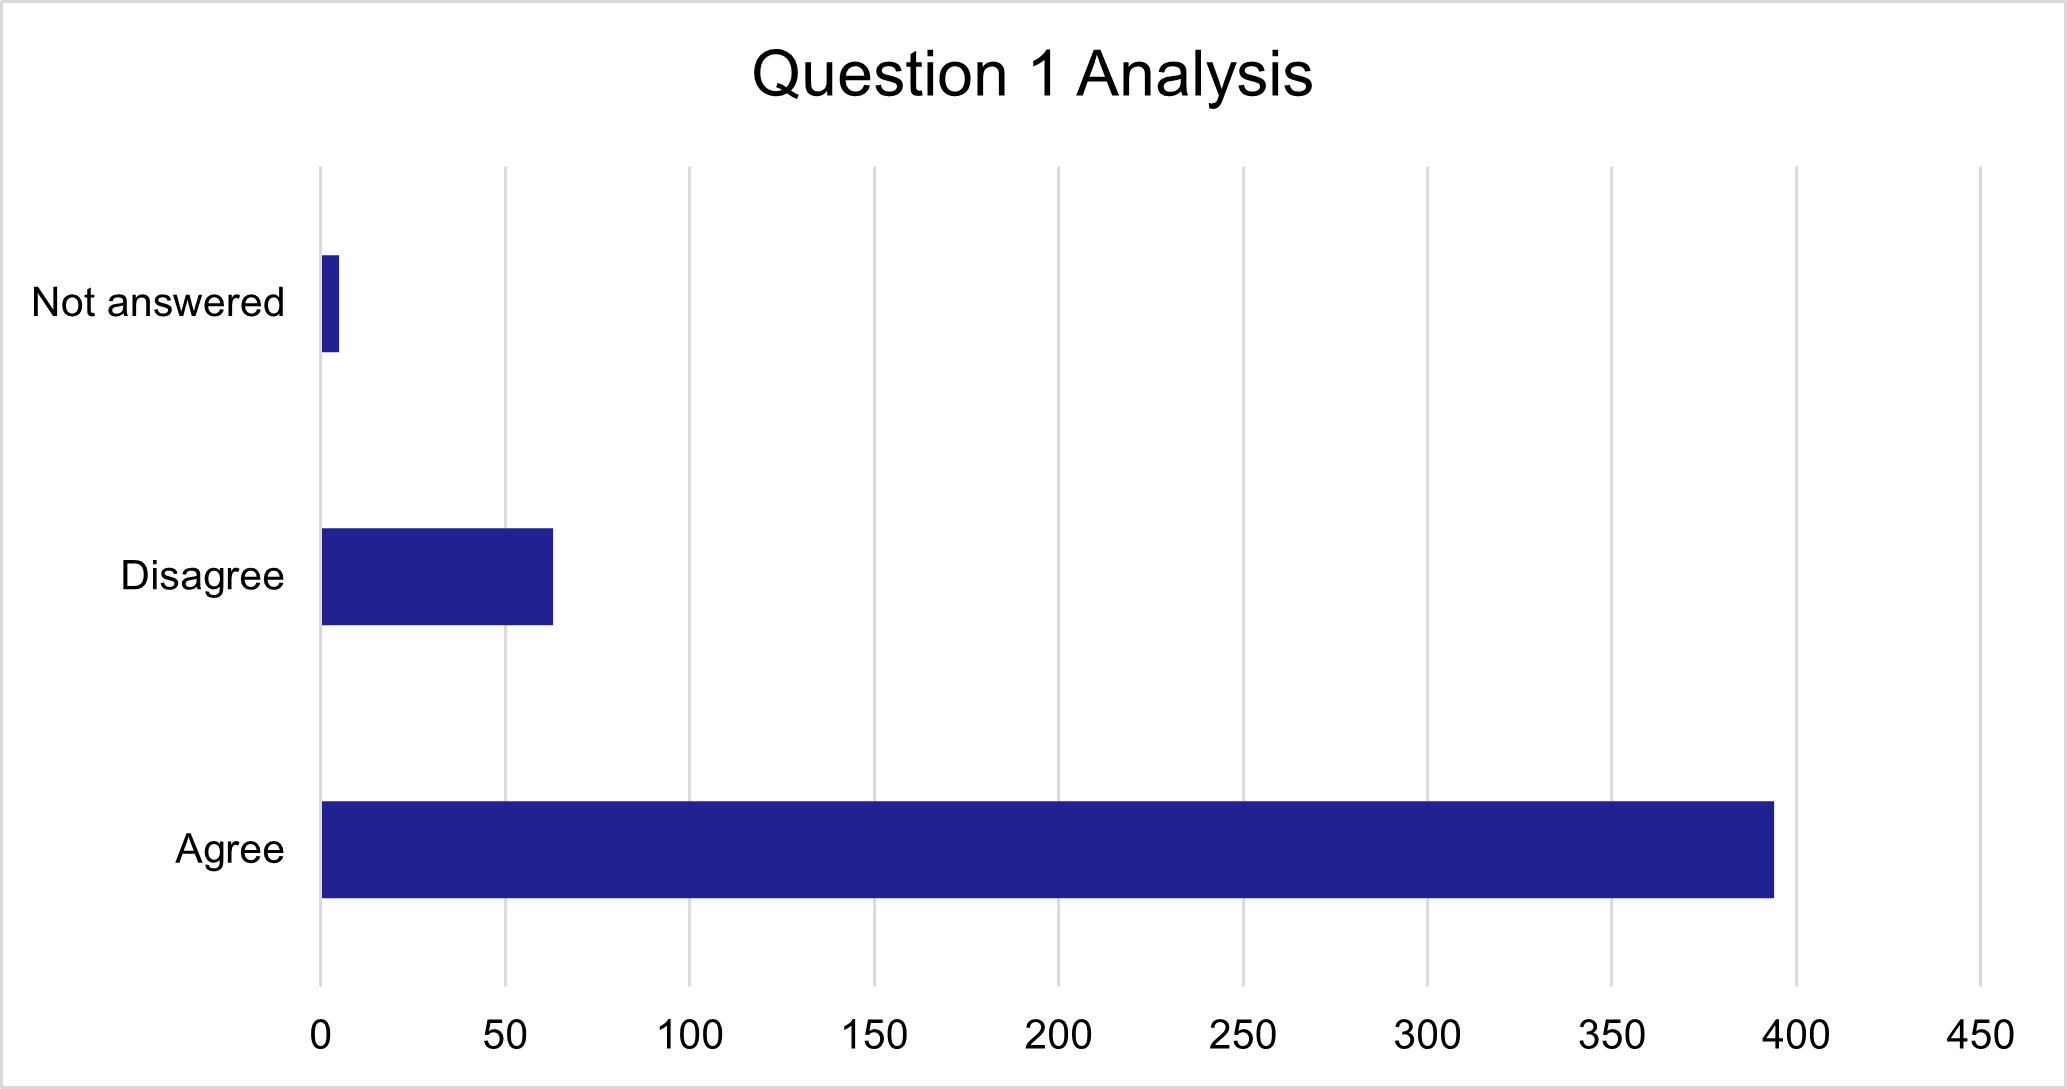 Question 1 responses, as described in text